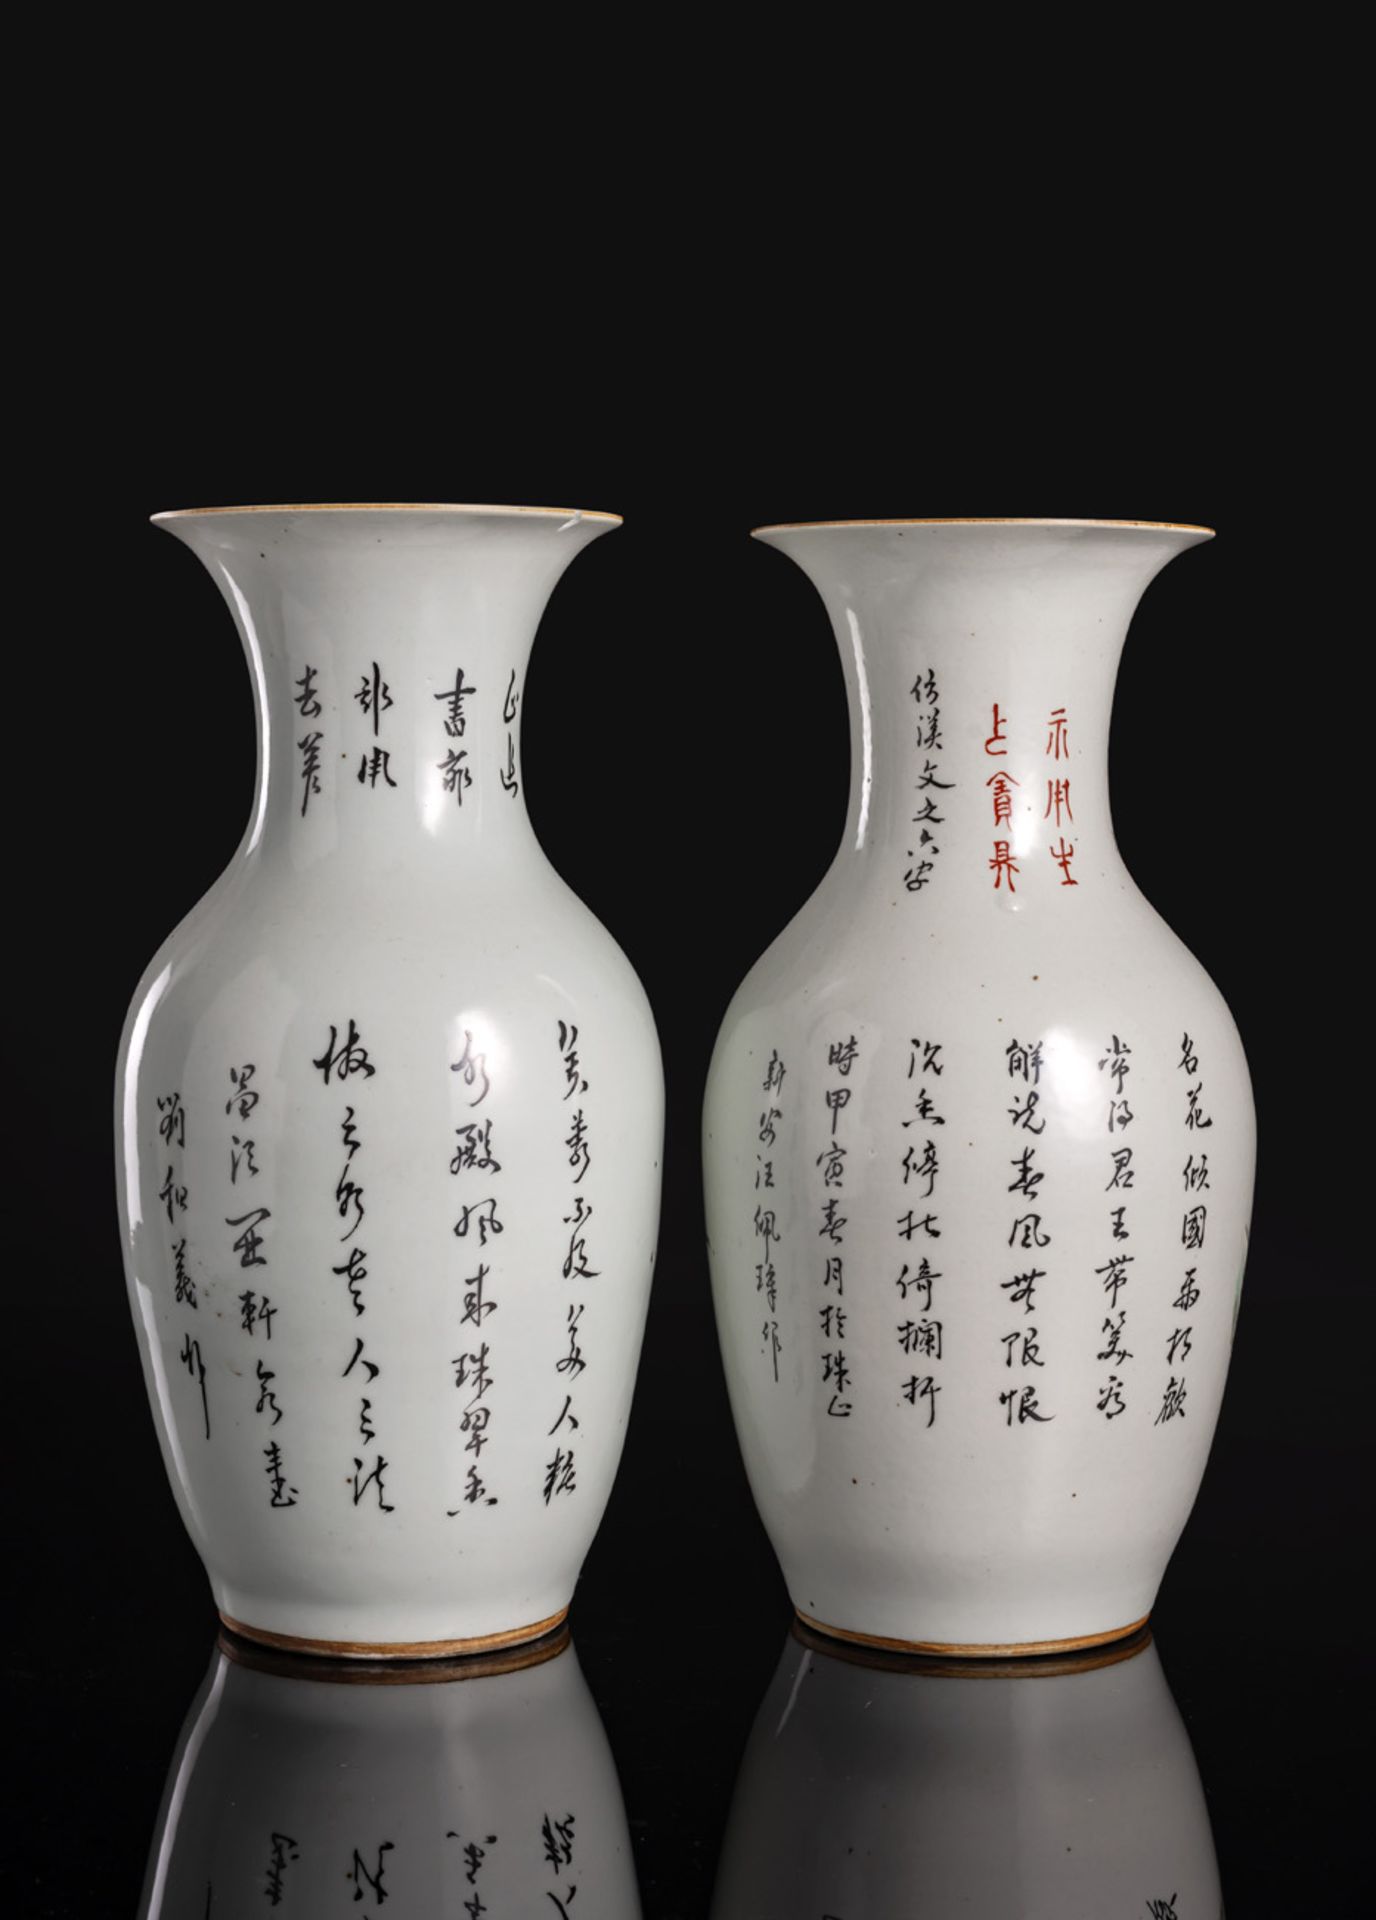 TWO QIANJIANGCAI PORCELAIN BALUSTER VASES DEPICTING LADIES ON A TERRACE AND POEMS - Image 2 of 2